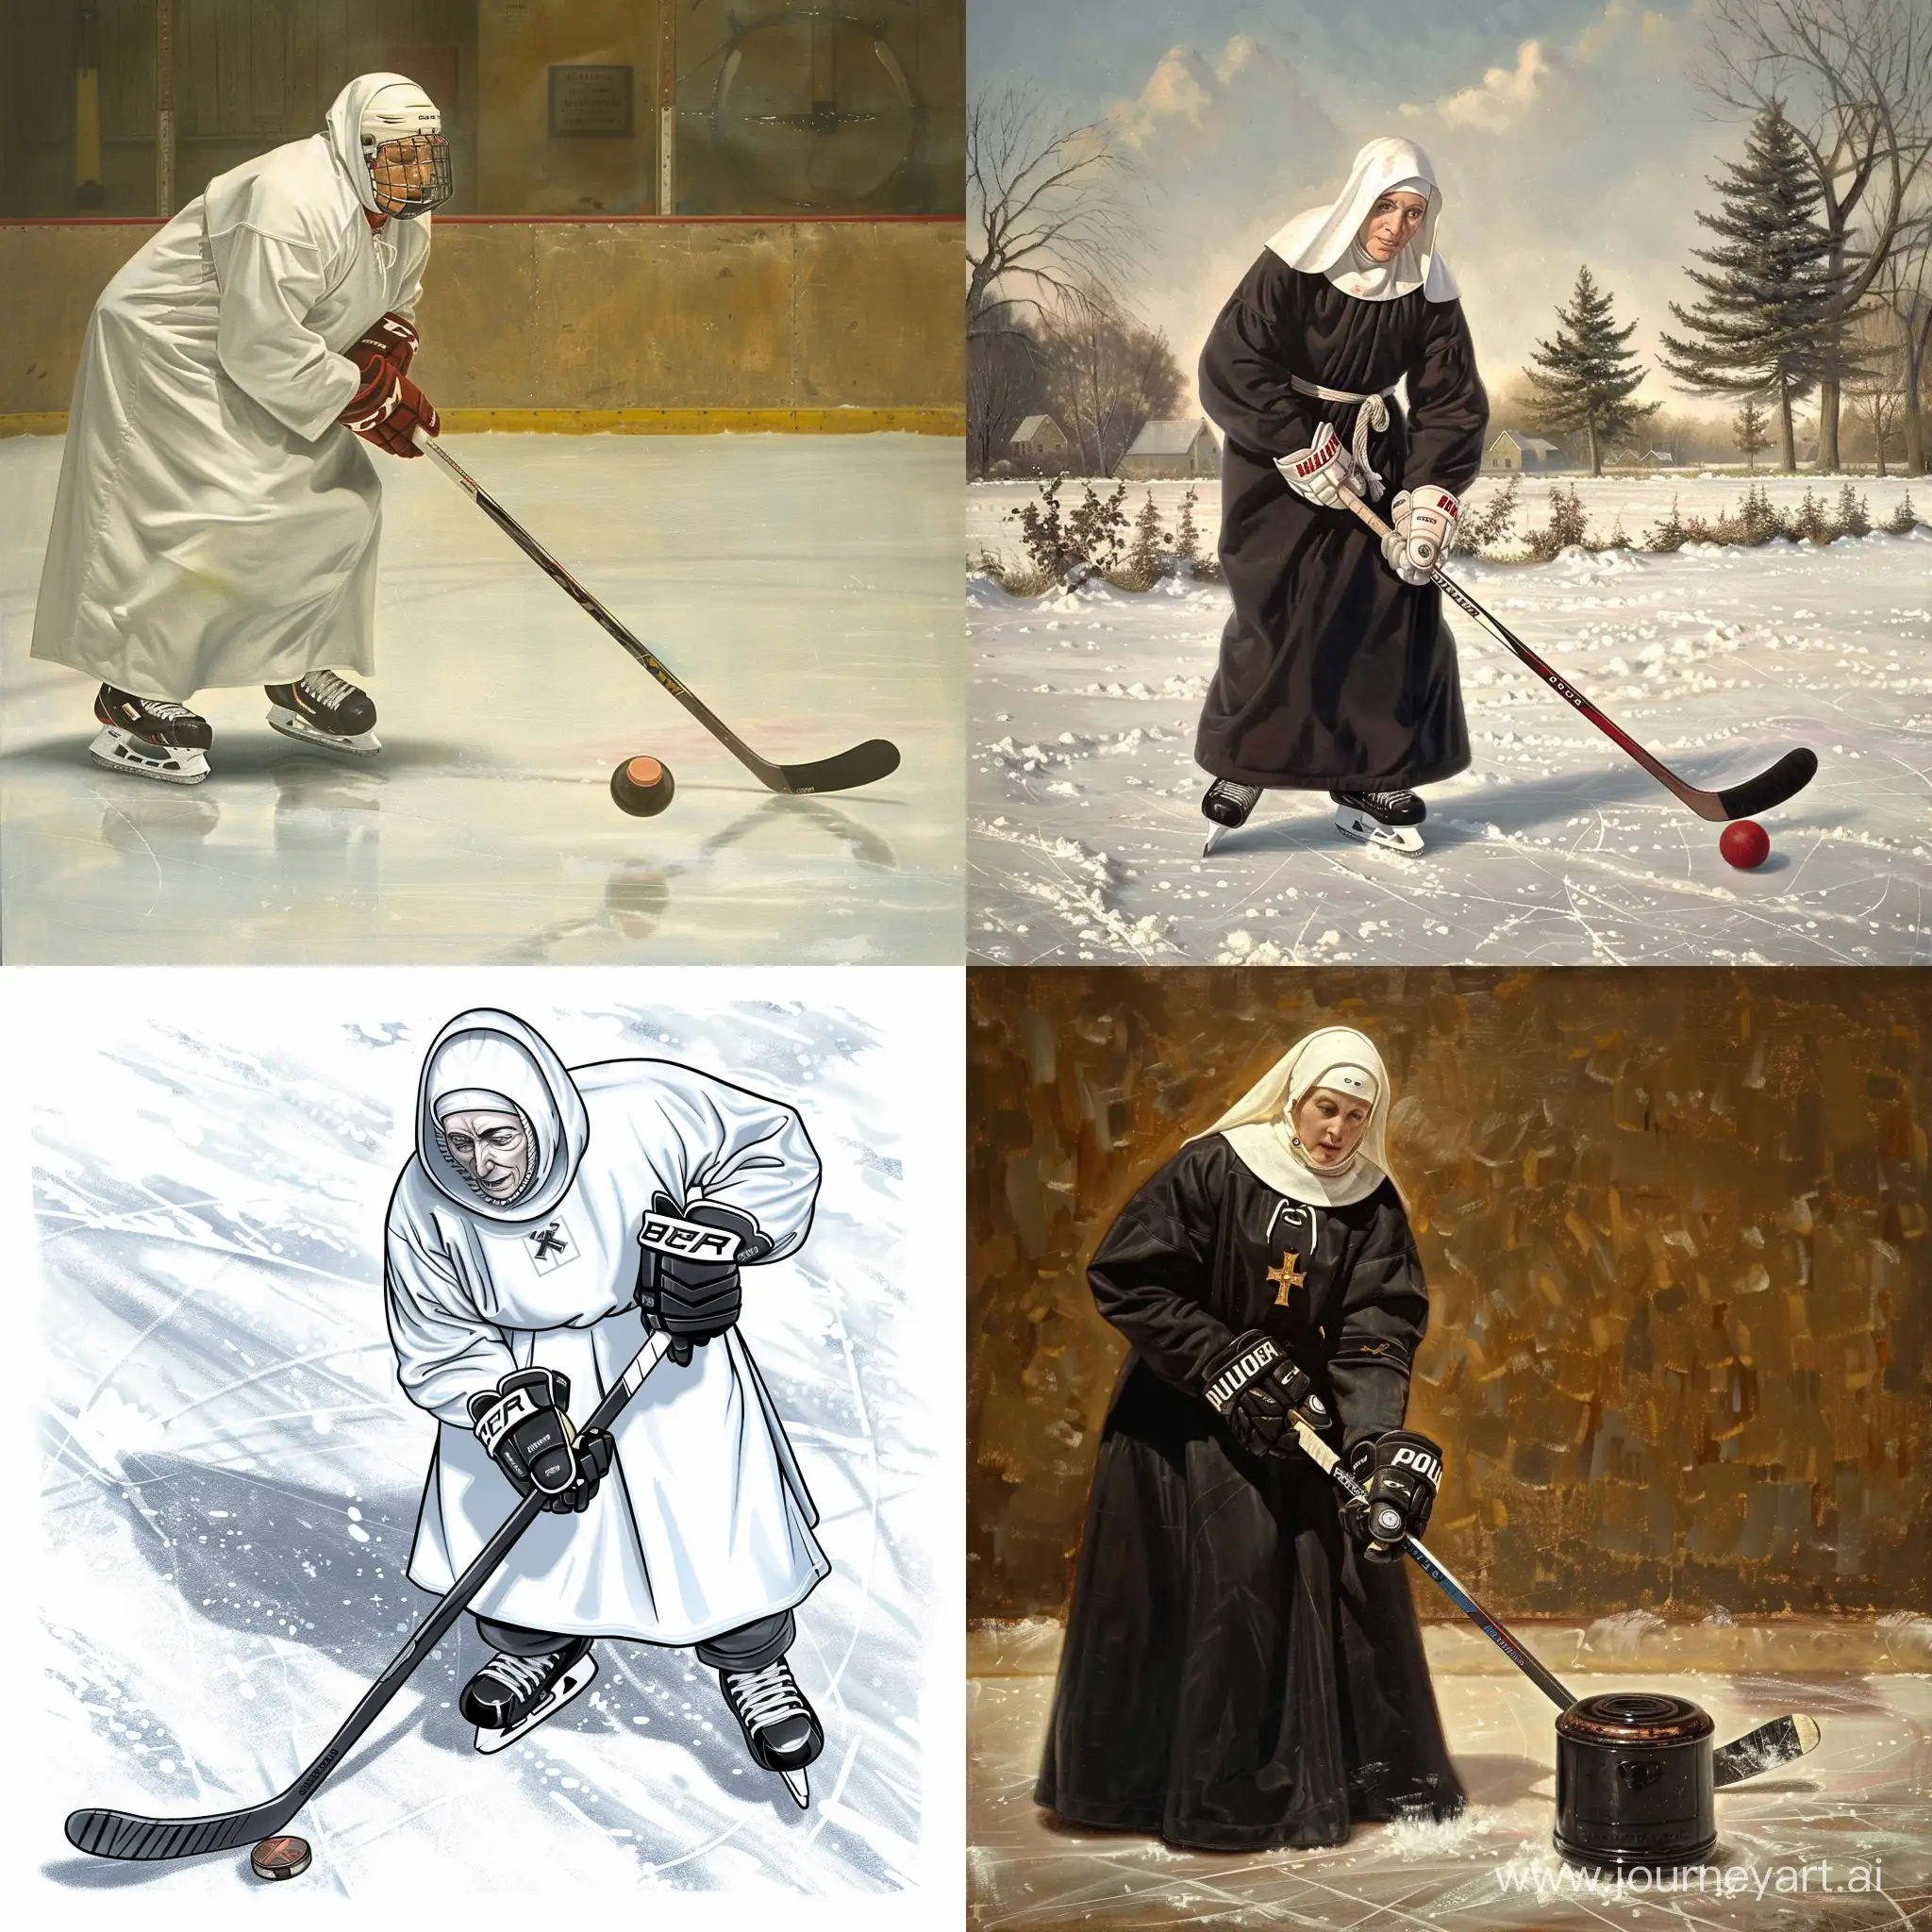 Eccentric-Harmony-Catholic-Nun-Engages-in-Psychedelic-Ice-Hockey-with-Gustav-Klimt-and-Jackson-Pollock-Fusion